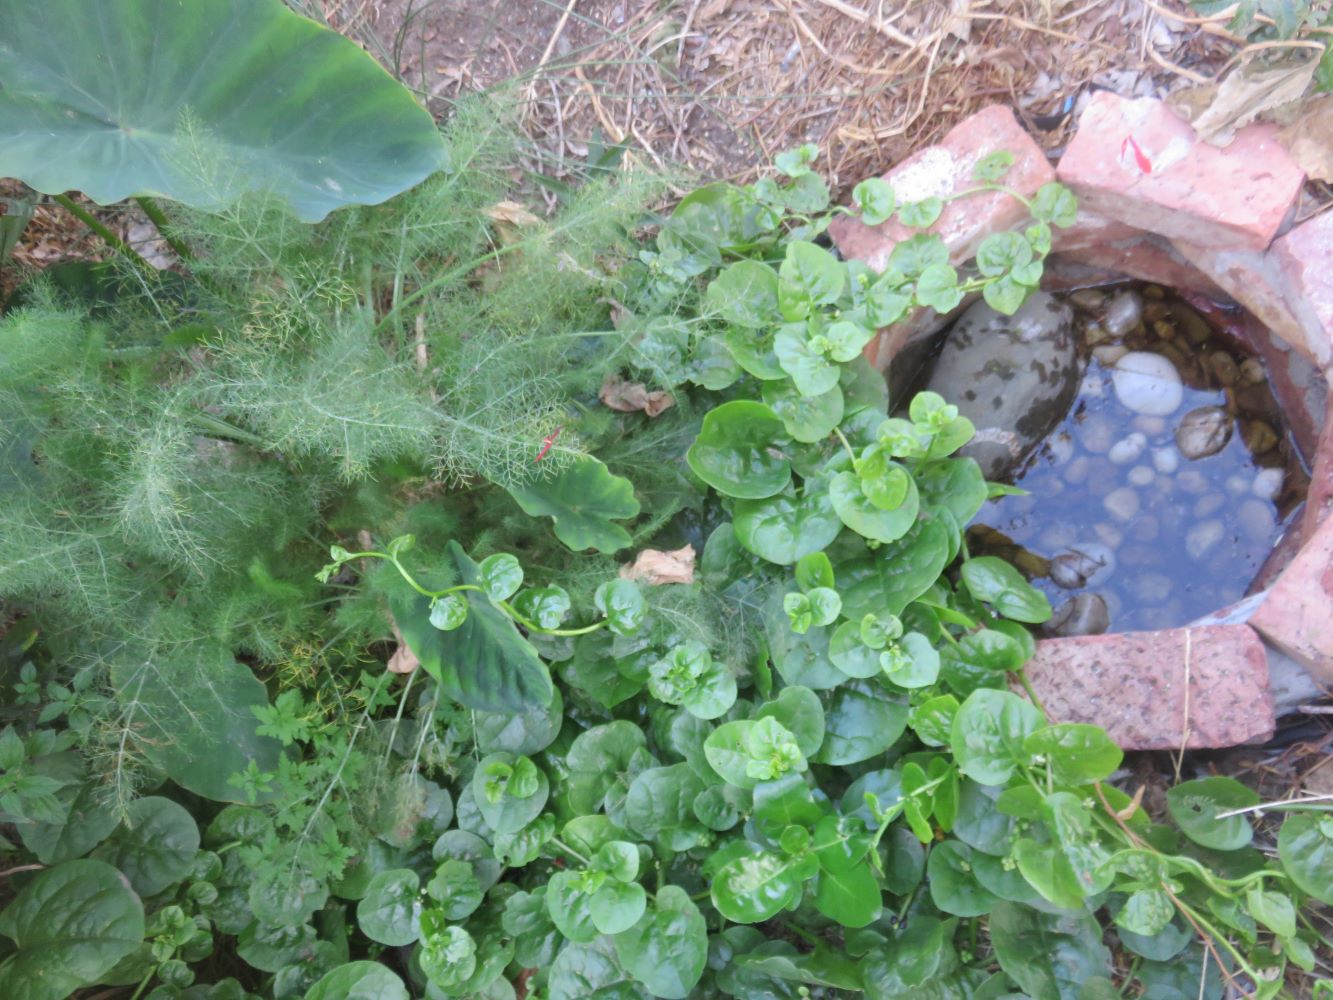 Harnessing living soil in a gray water bio-filter which decomposes the soap and body dirt, to gently and slowly supply plant nutrients. The taro, fennel and climbing spinach are very grateful.